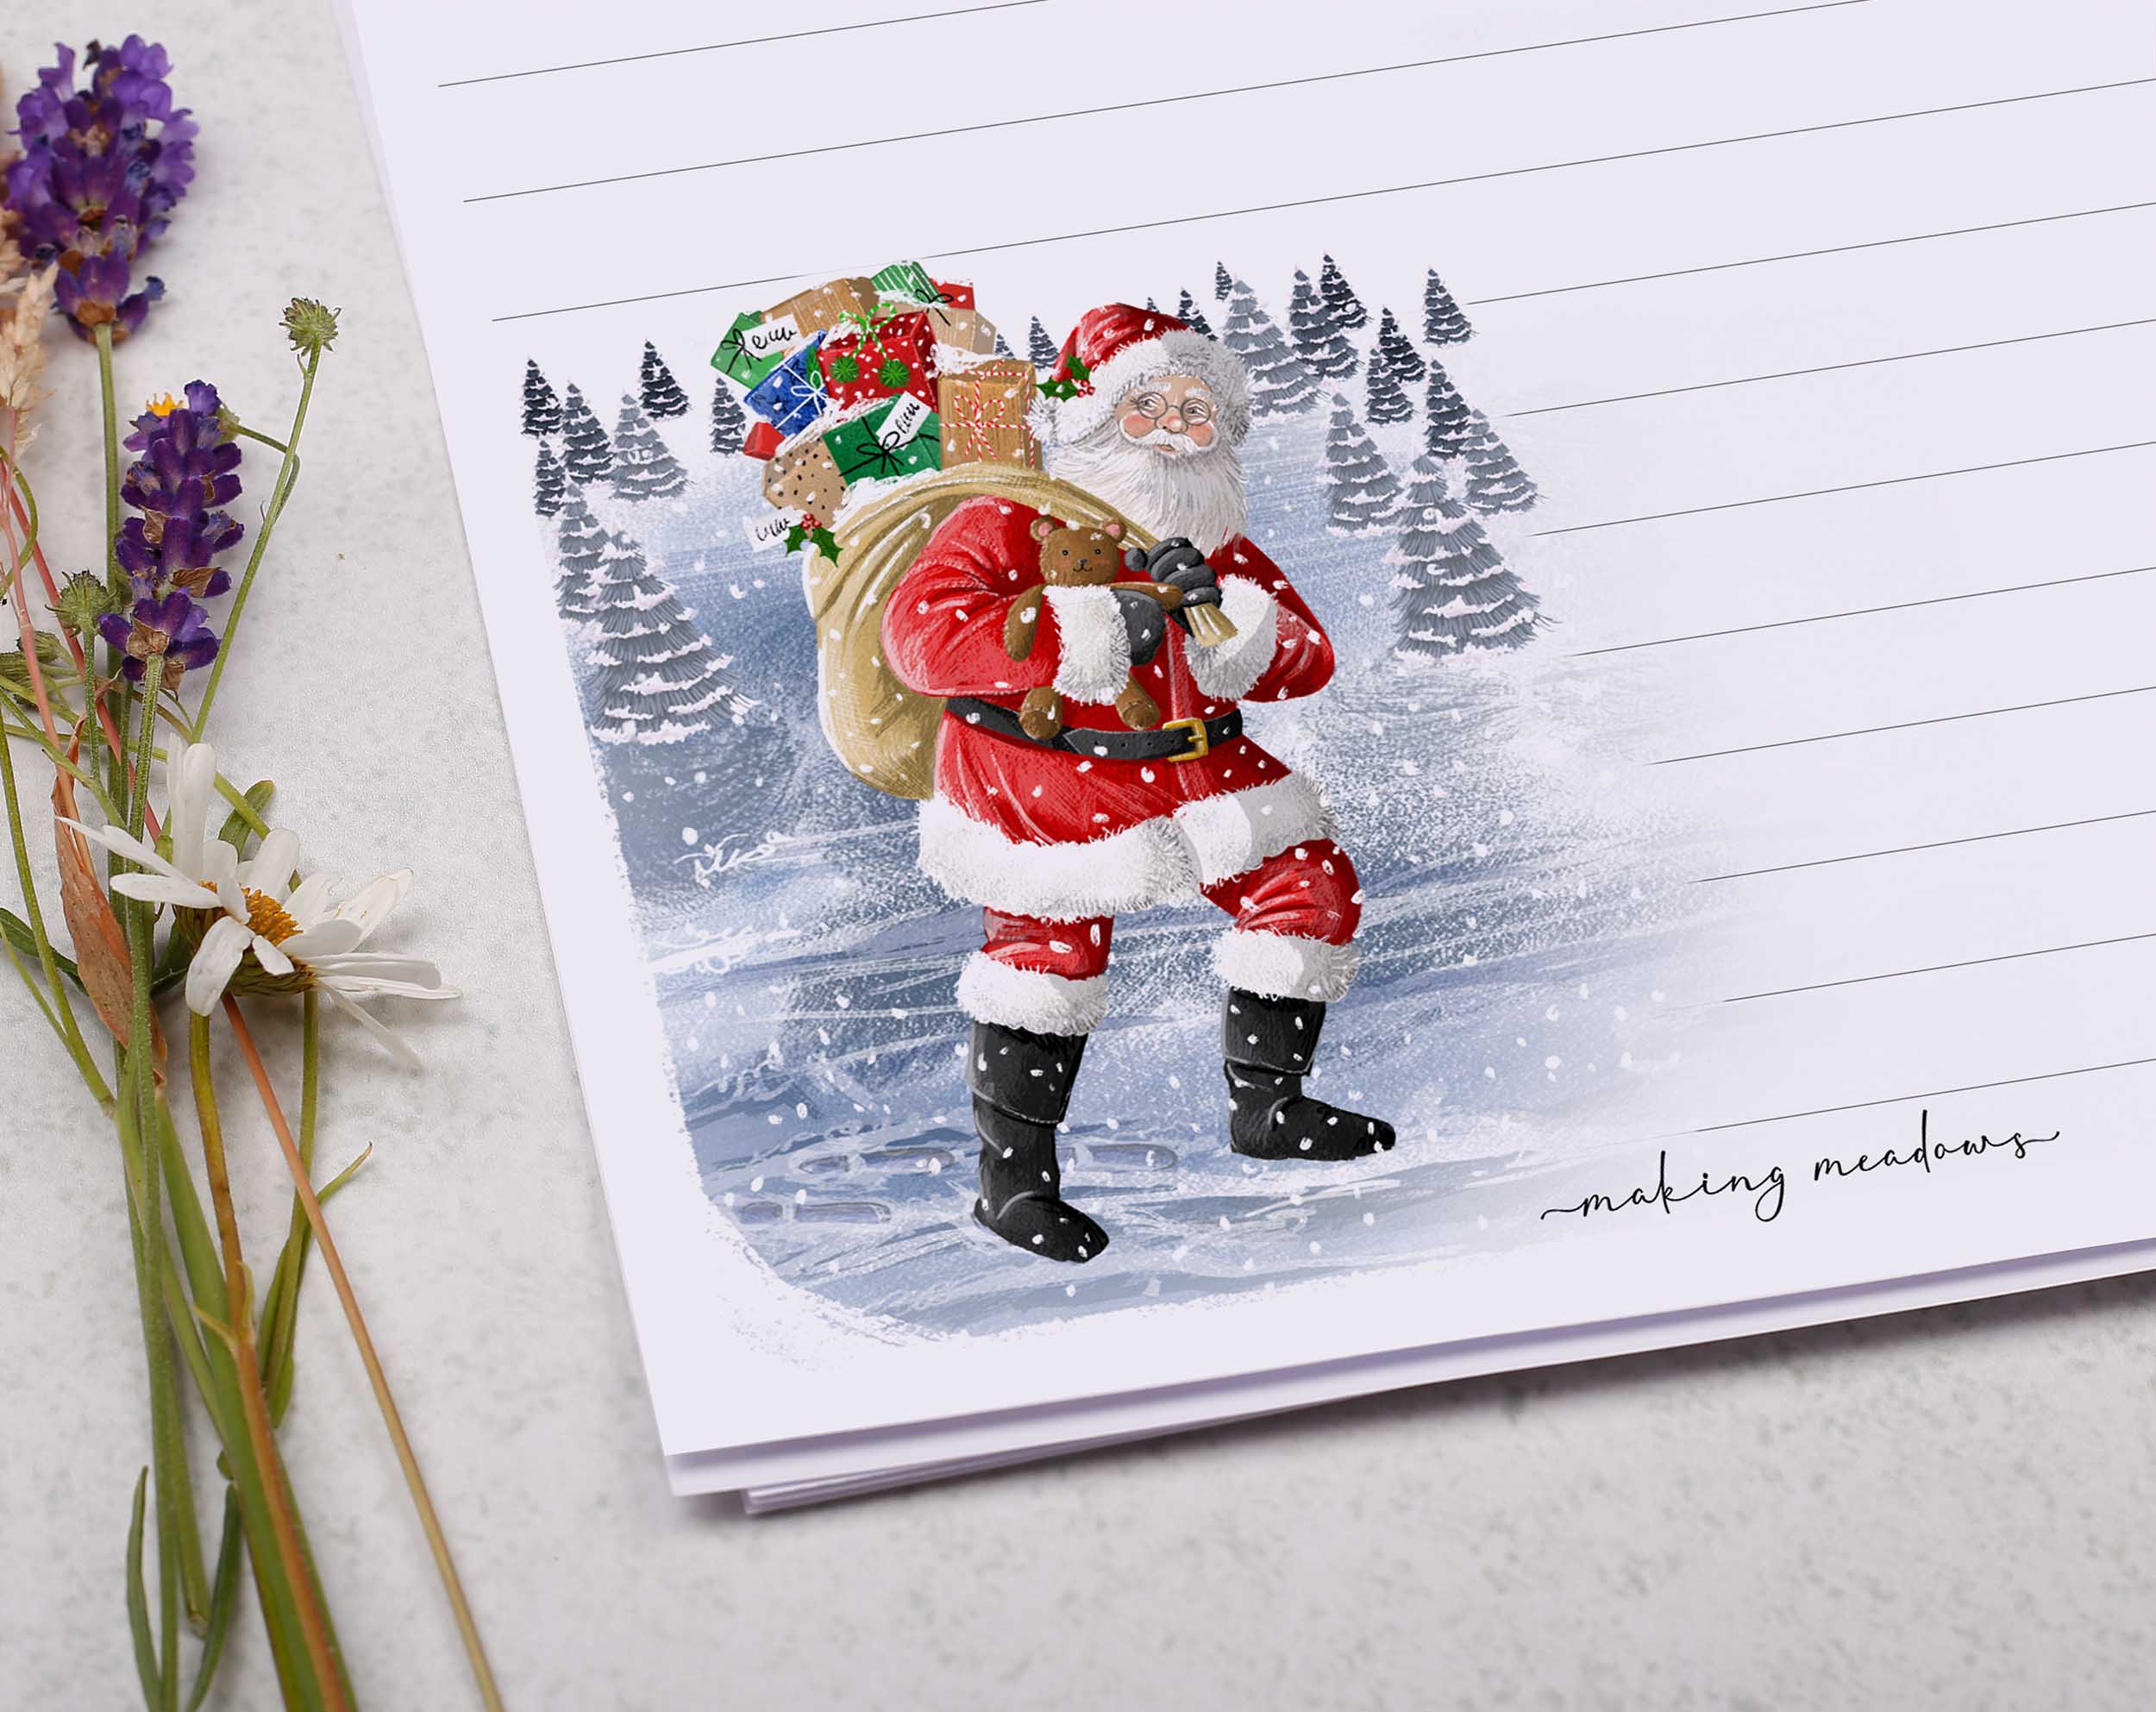 Premium personalised A5 letter writing paper set with Father Christmas plodding through the snow, delivering his presents.